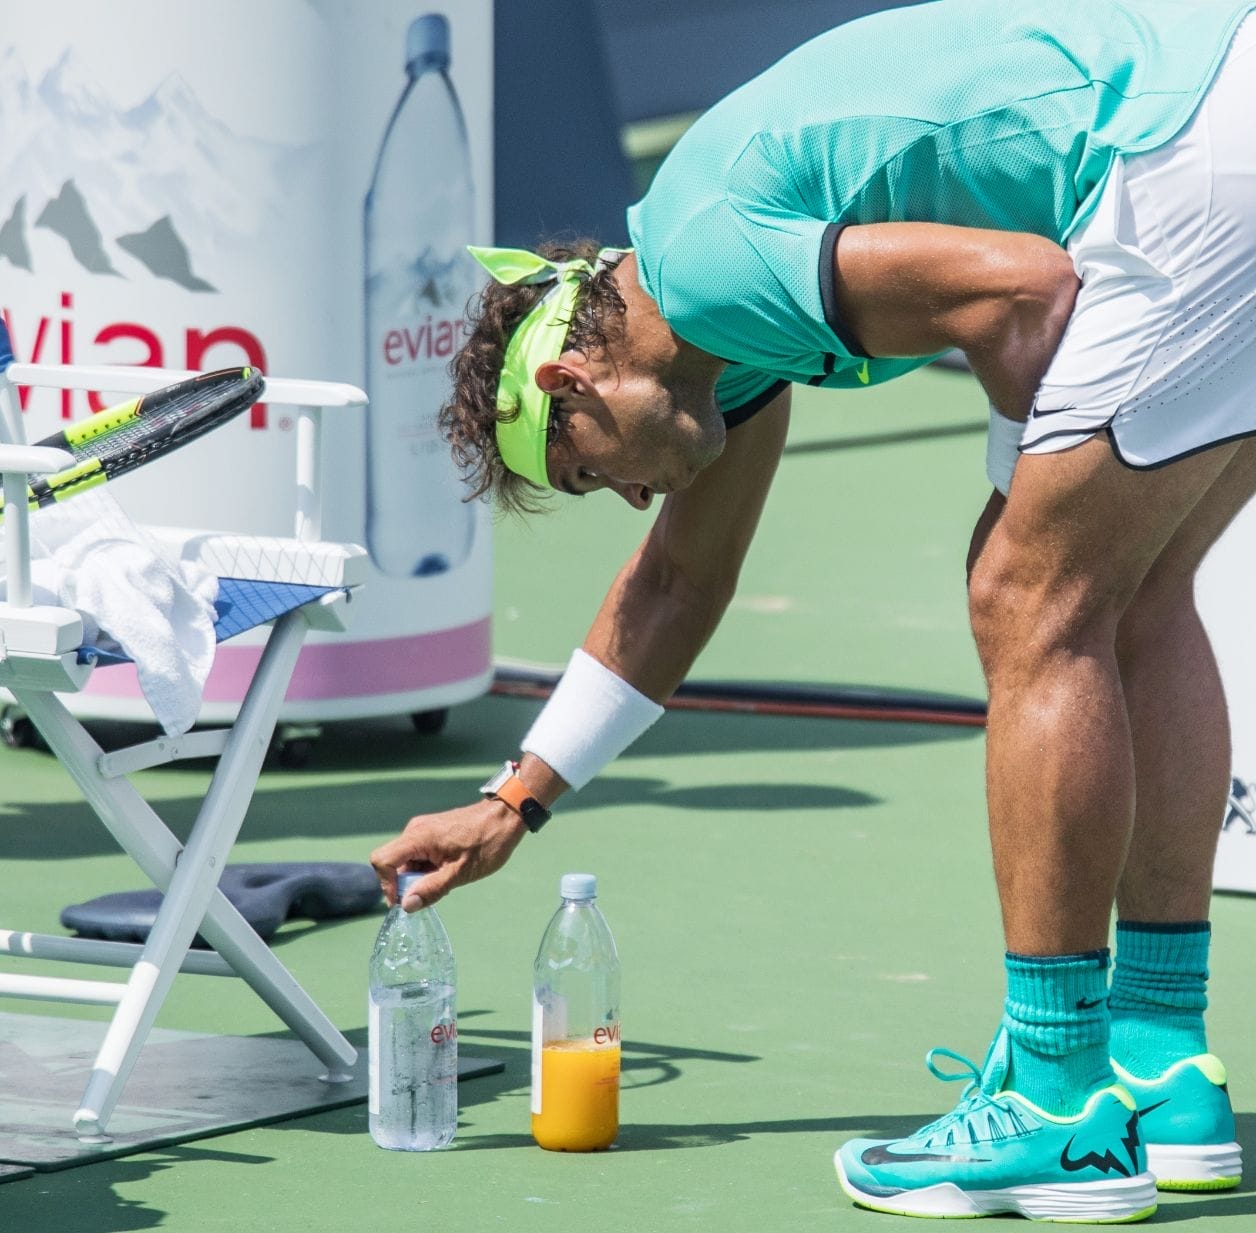 A tennis player stares intently at two bottles that he adjusting on the ground in front of a courtside chair.